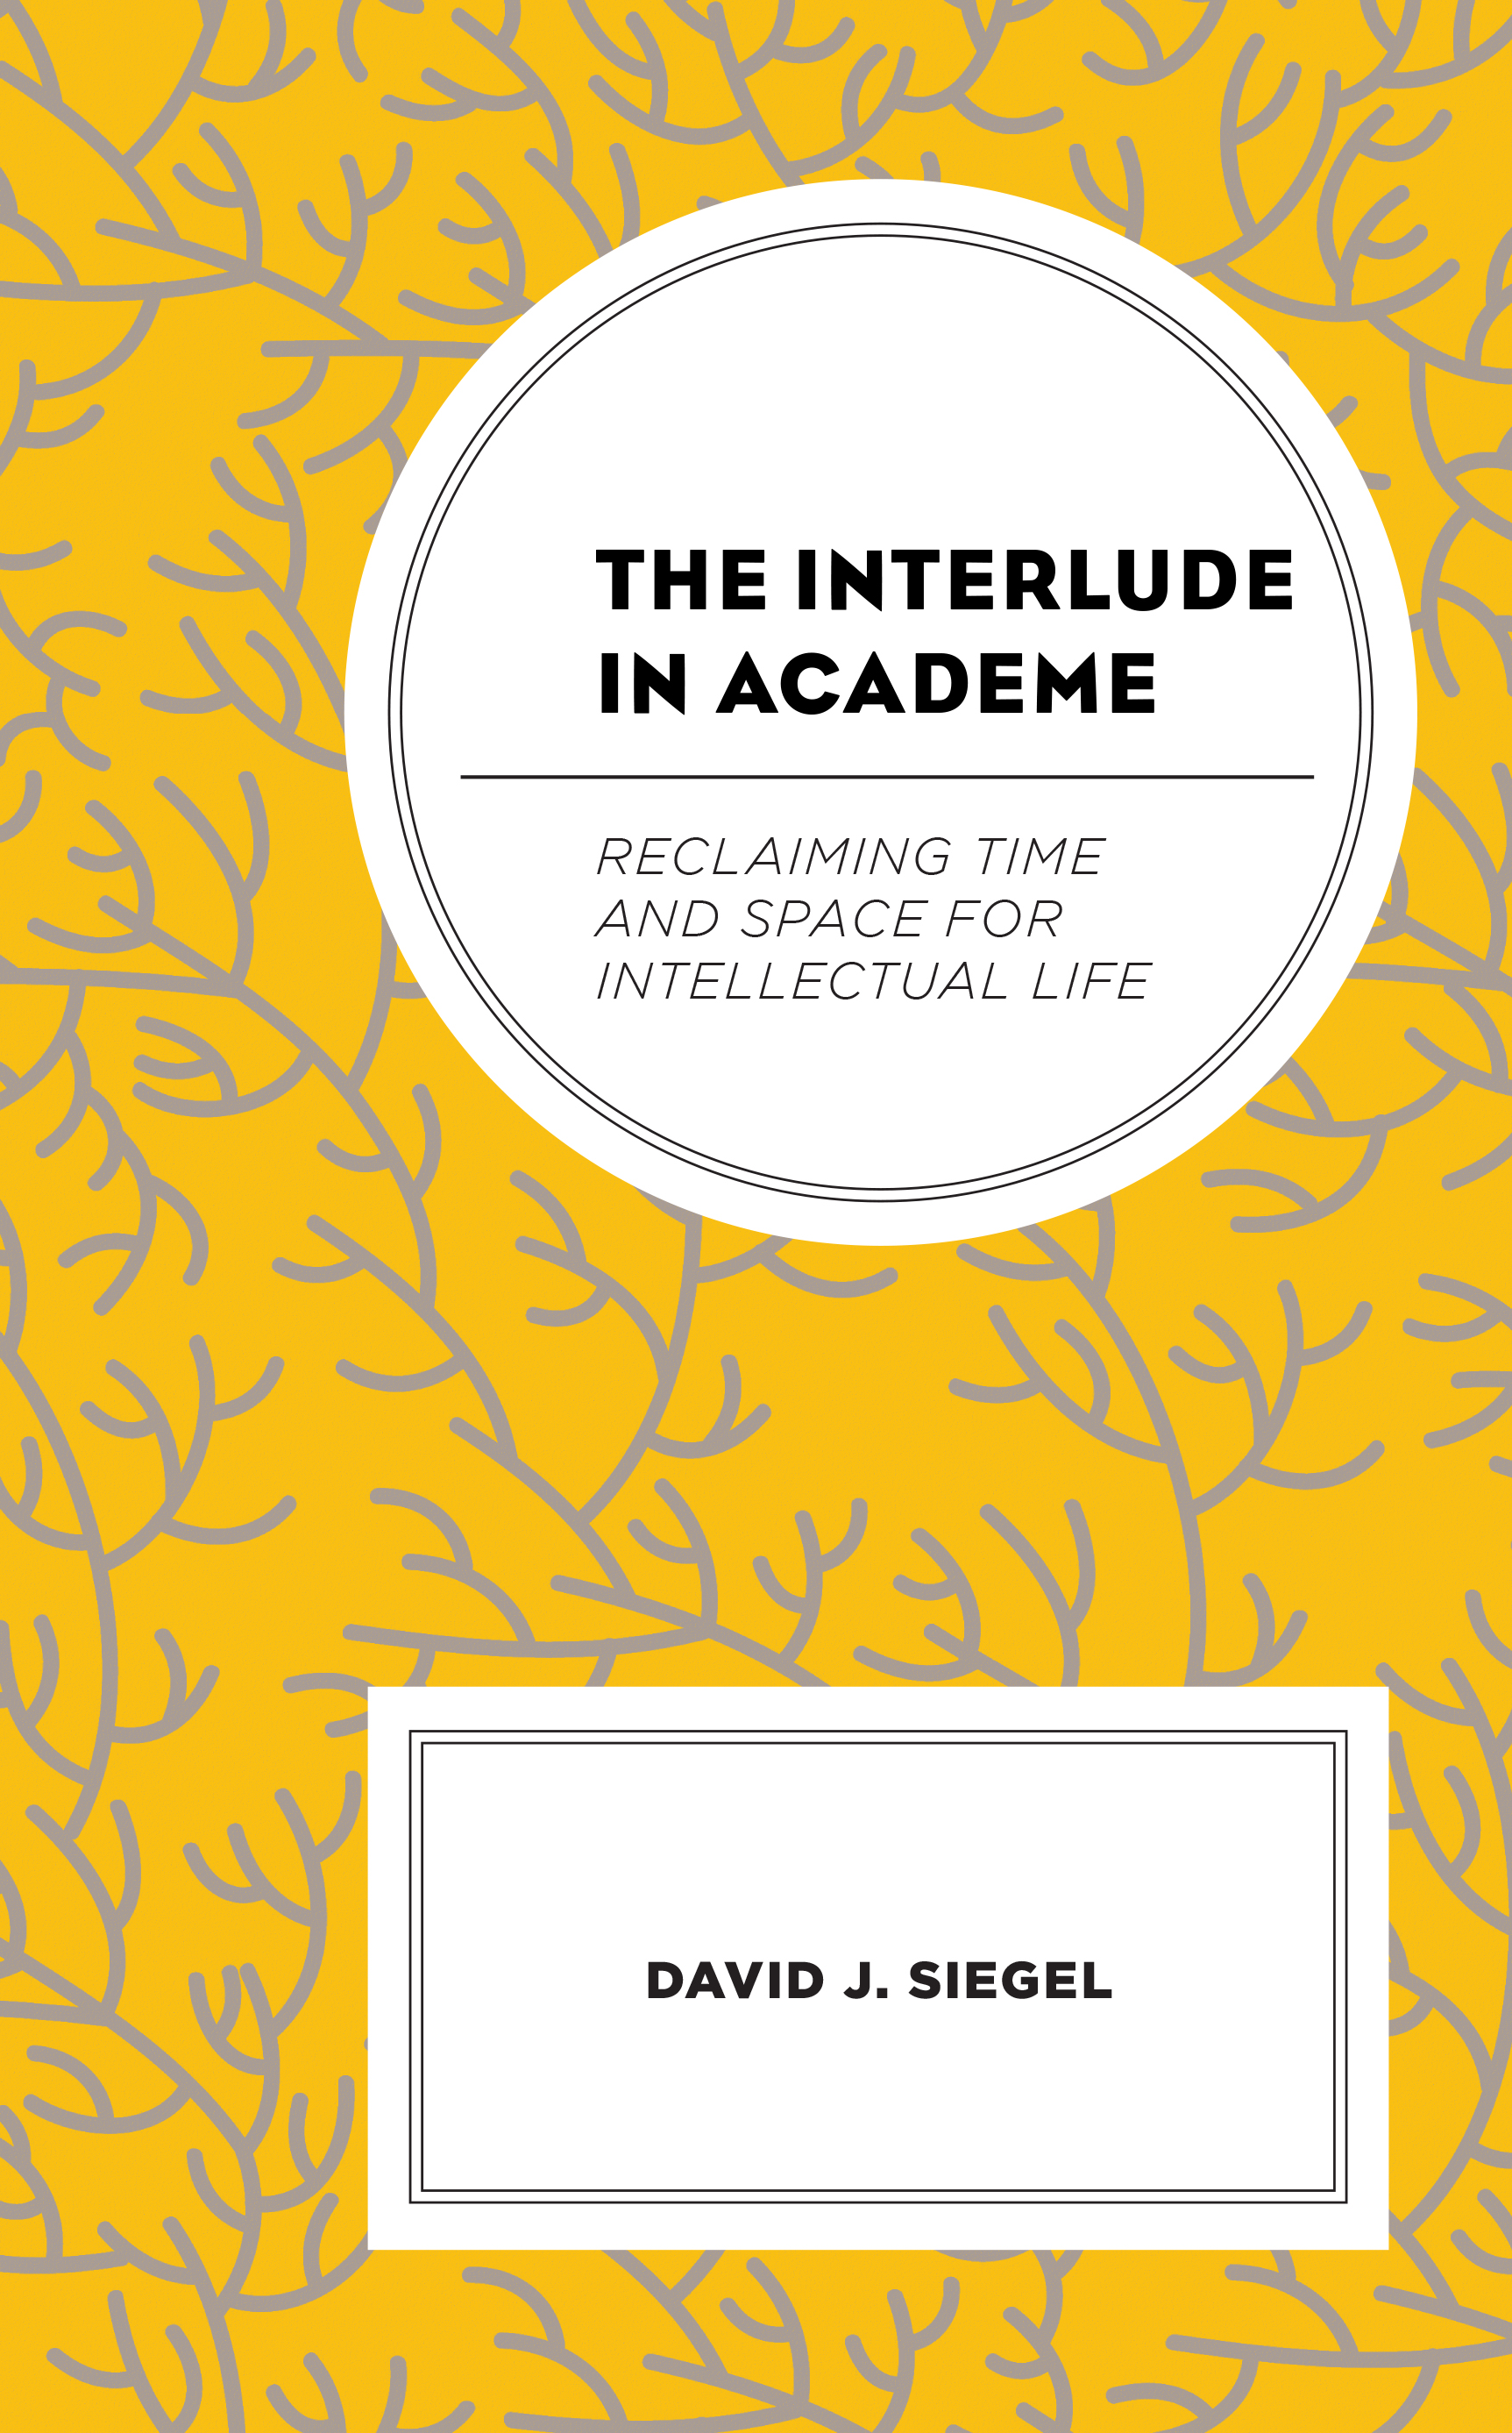 The Interlude in Academe: Reclaiming Time and Space for Intellectual Life